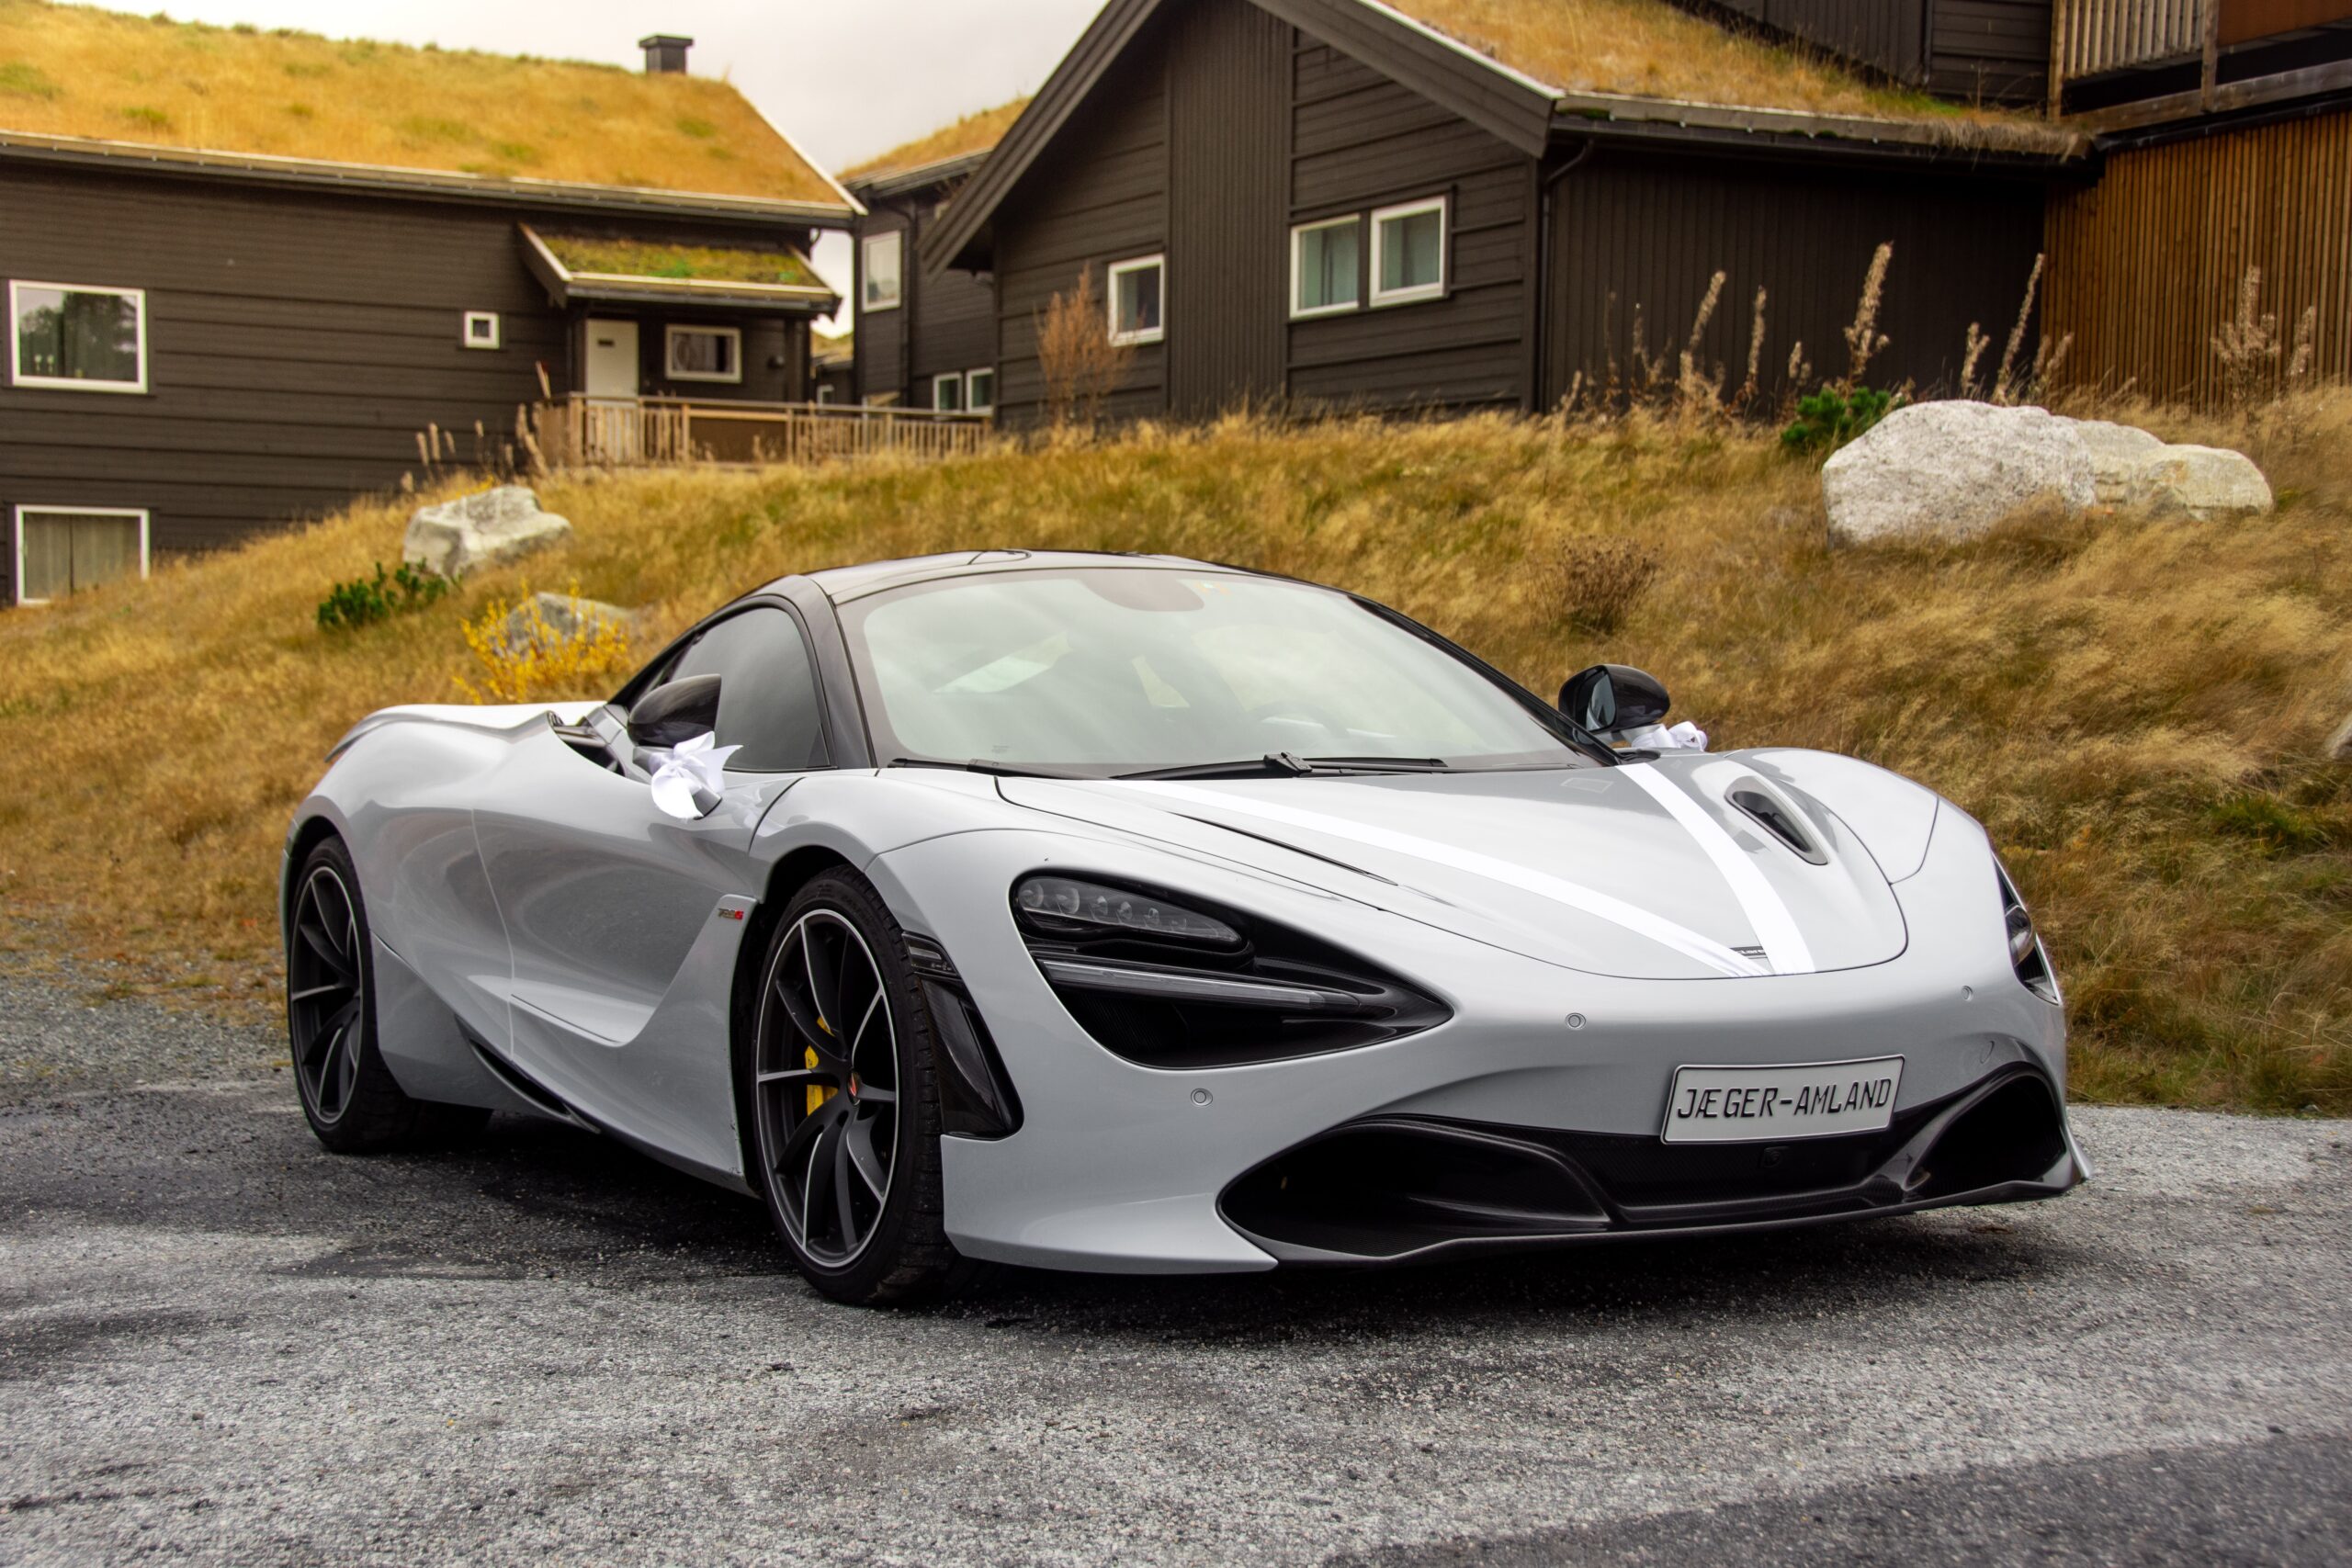 Silver McLaren 720S in the Countryside